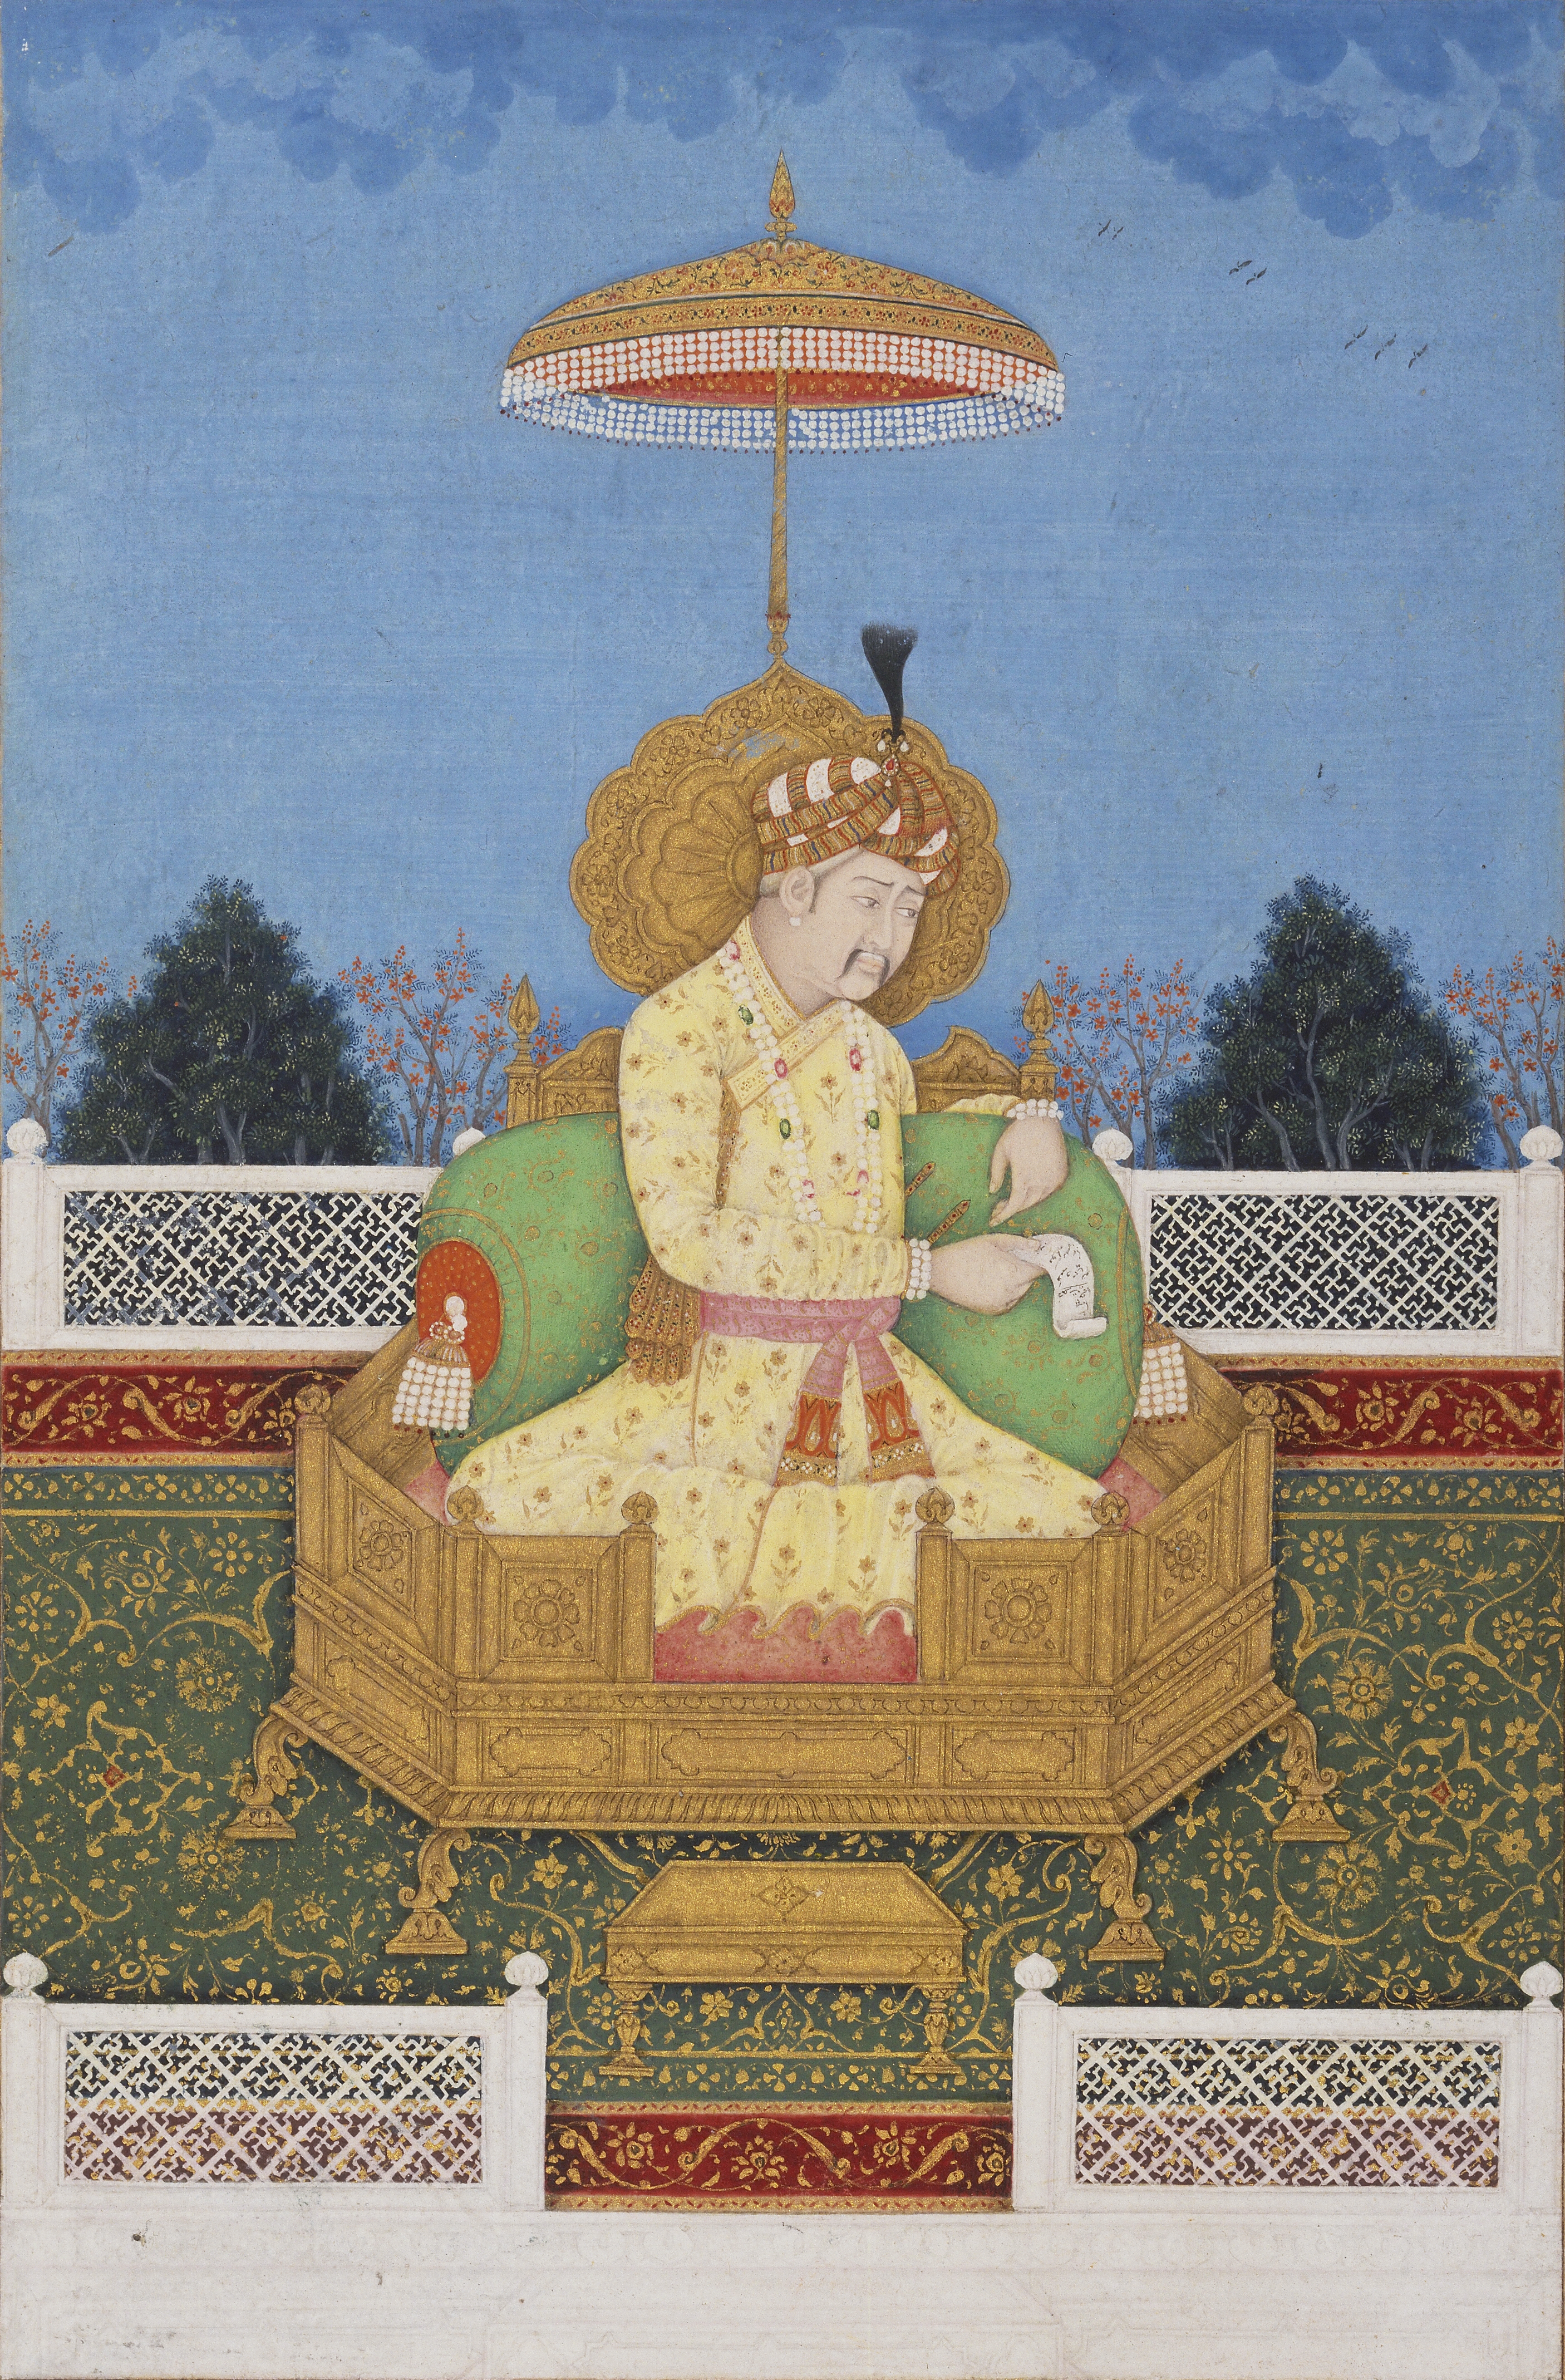 Man of royalty dressed in fancy clothes sitting on what looks like a throne with an ornate umbrella over his head. Blue sky in background. very detailed.